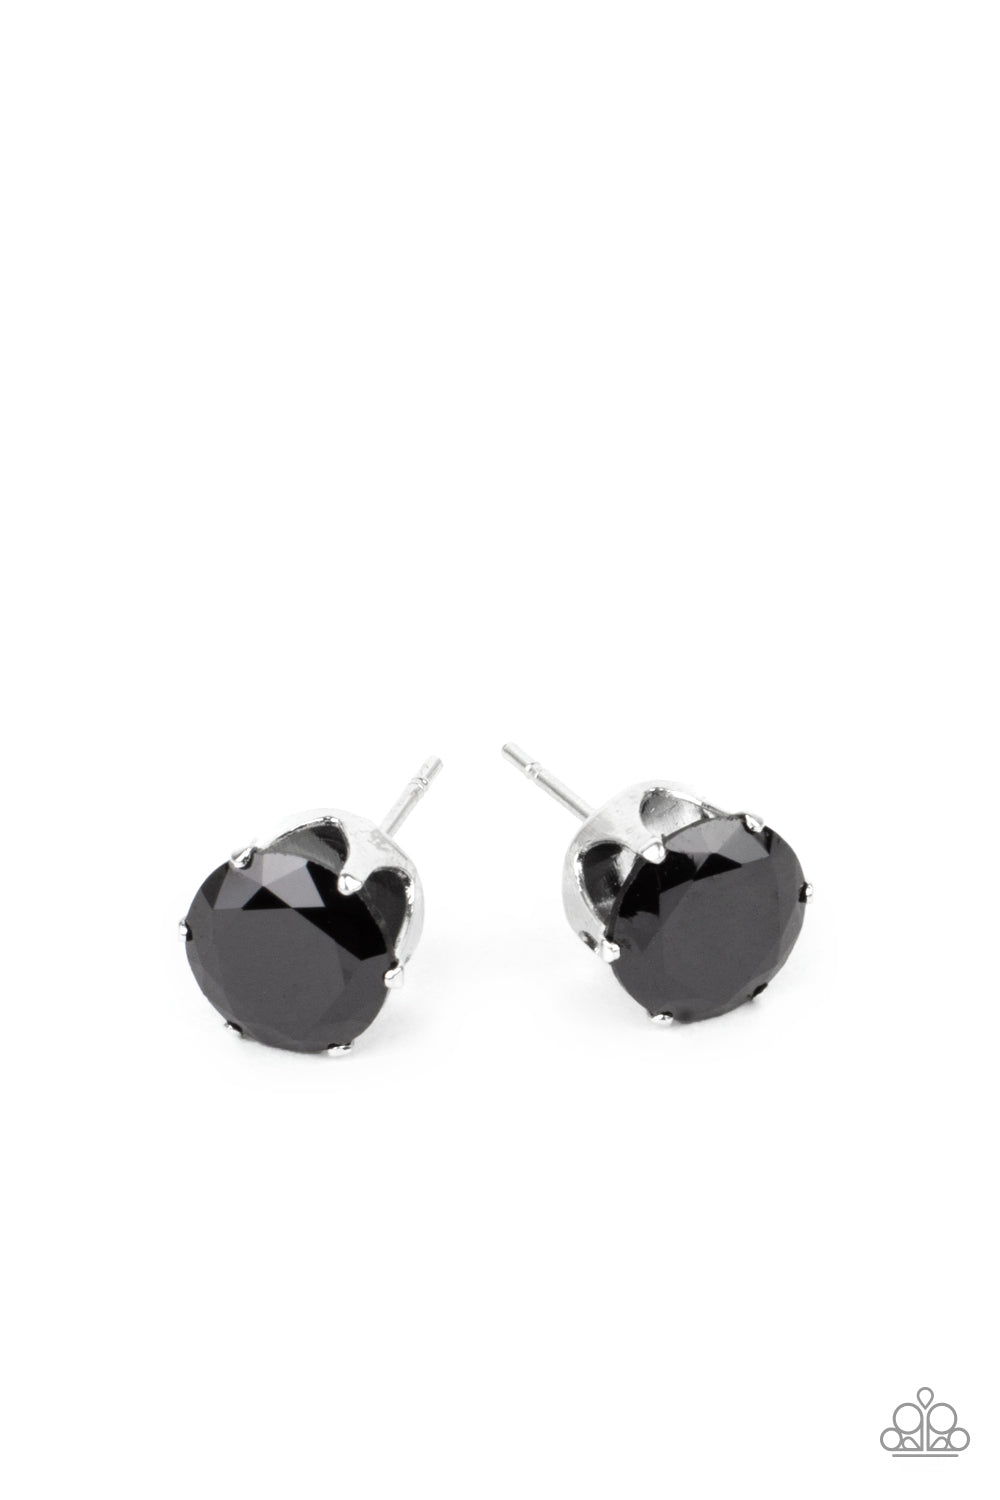 Paparazzi Accessories Modest Motivation - Black Stud Earrings an oversized black rhinestone is nestled inside a pronged silver fitting, creating a timeless statement piece. Earring attaches to a standard post fitting.  Sold as one pair of post earrings.  Paparazzi Jewelry is lead and nickel free so it's perfect for sensitive skin too!